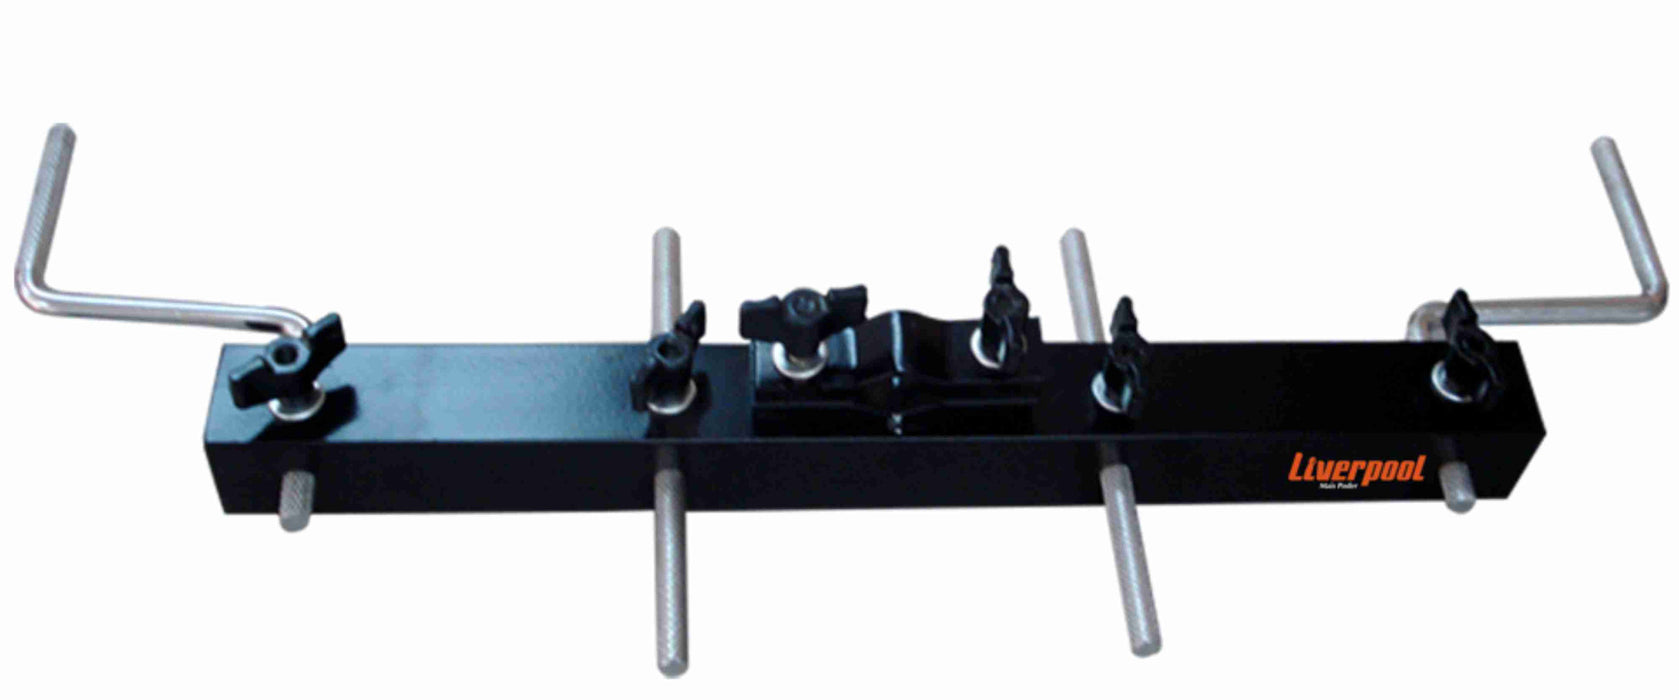 Liverpool Heavy Duty Steel Percussion Rack - Four Position - AMERICAN RECORDER TECHNOLOGIES, INC.